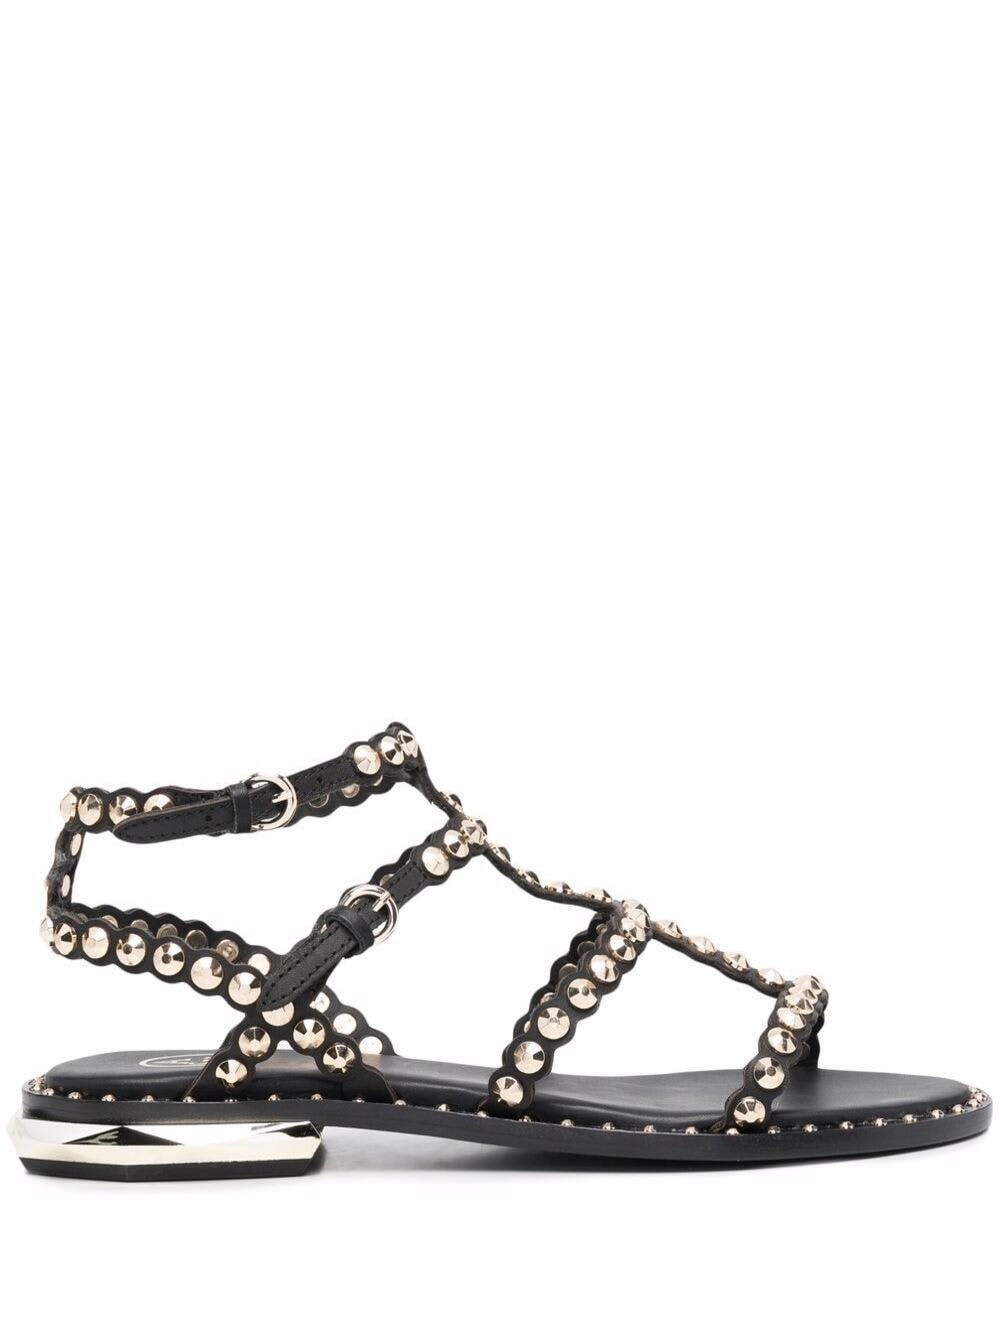 Ash Womans Black Leather Sandals With Studs